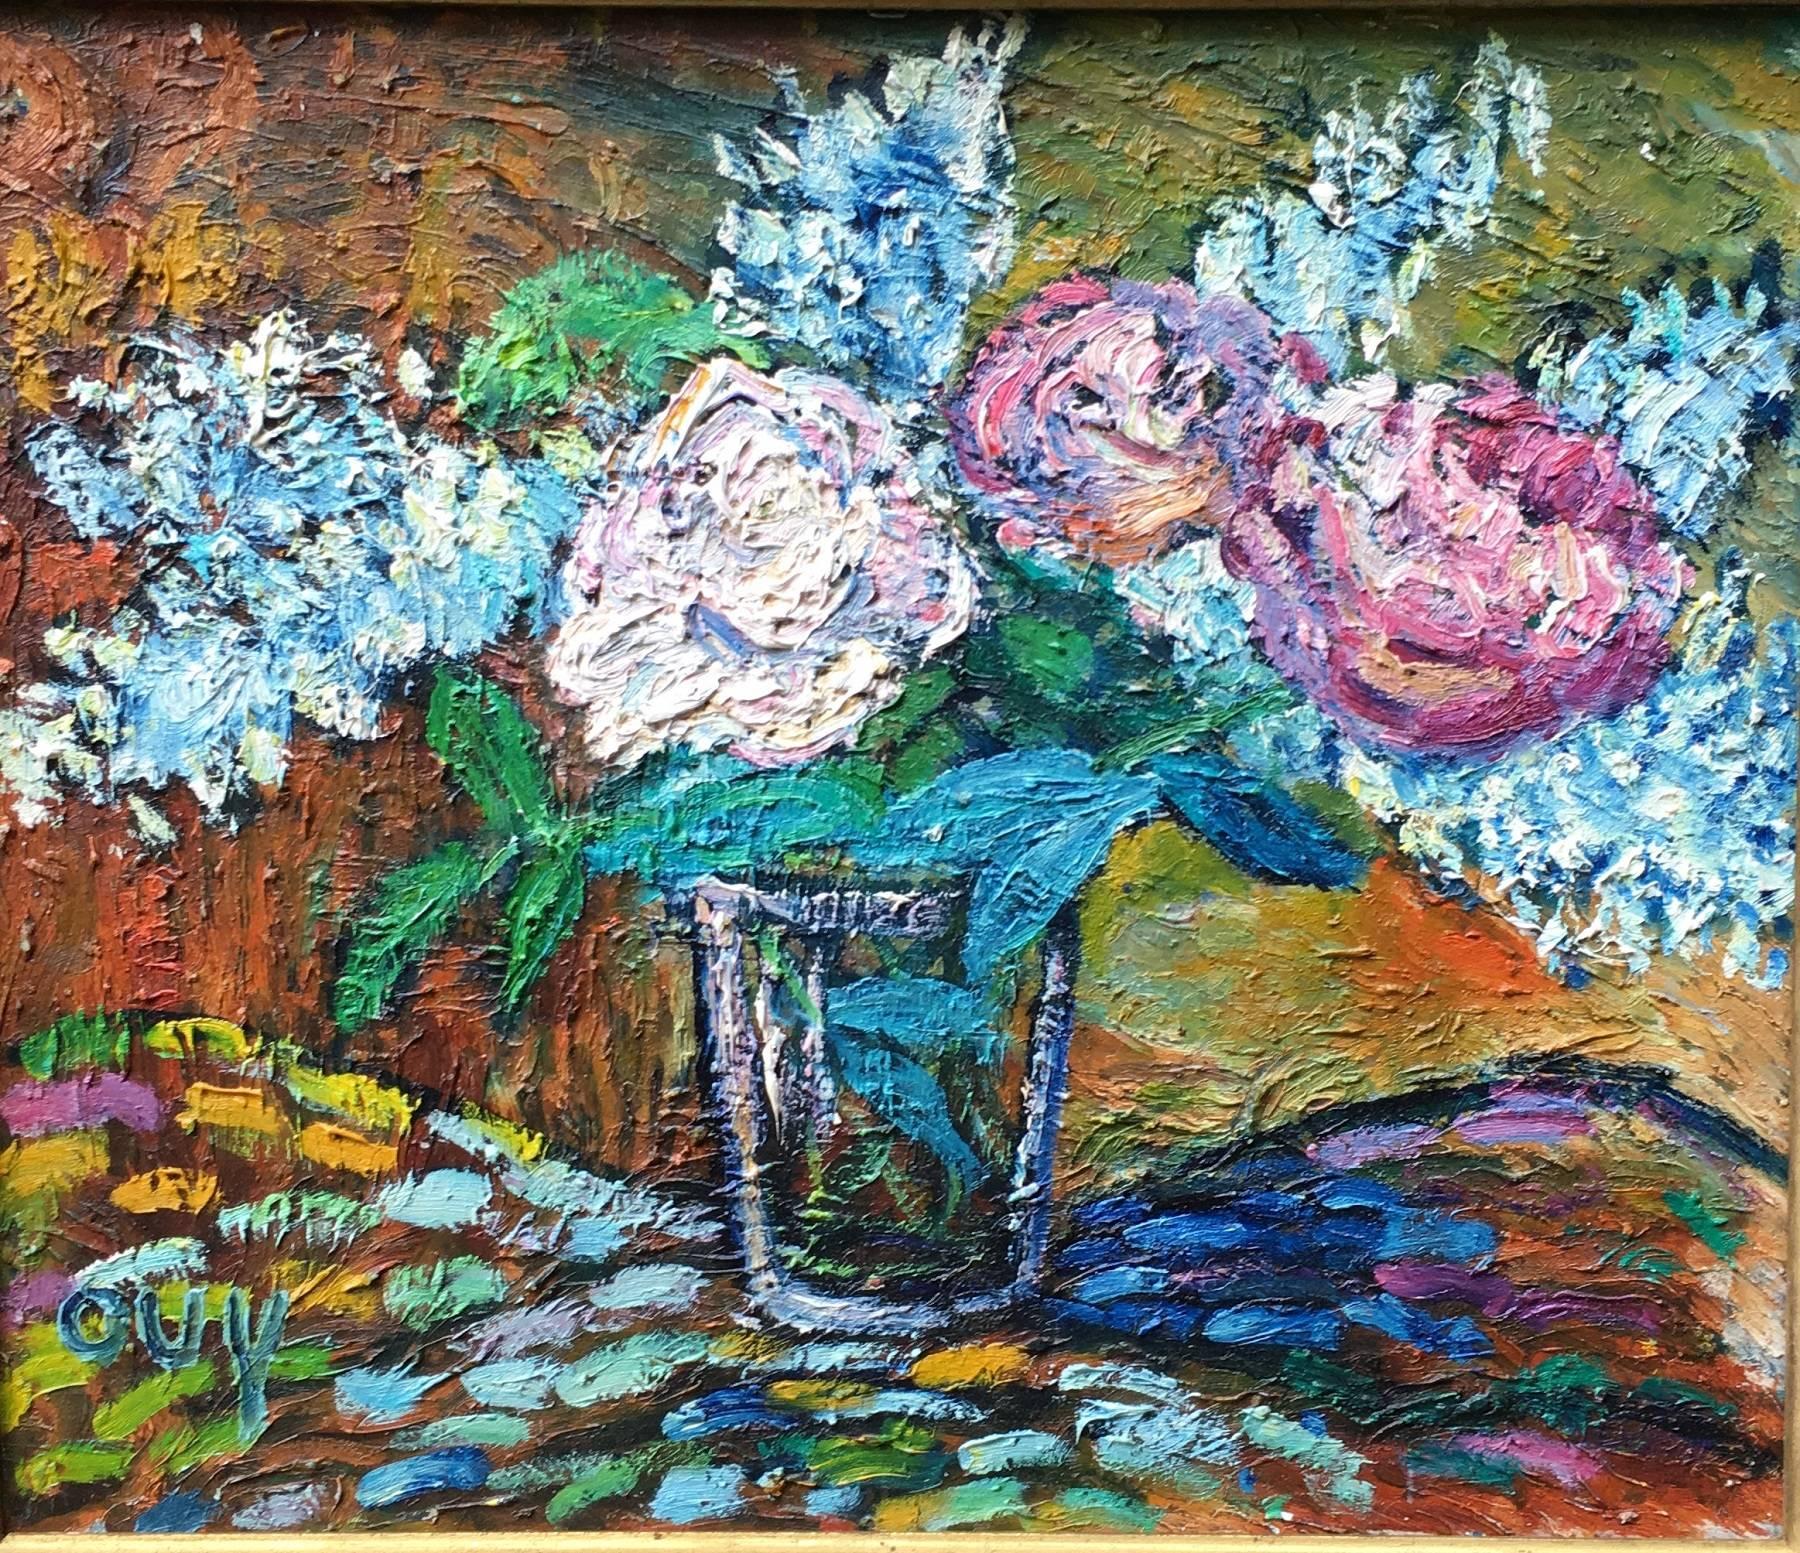 A striking oil on board of colorful hydrangeas in a vase. Painted by the French Artist Gerard Albouy and signed Ouy his artist's name. Gerard Albouy 1912-1985 was a Parisien hat maker renowned in Parisien fashion circles. His hobbies included buying